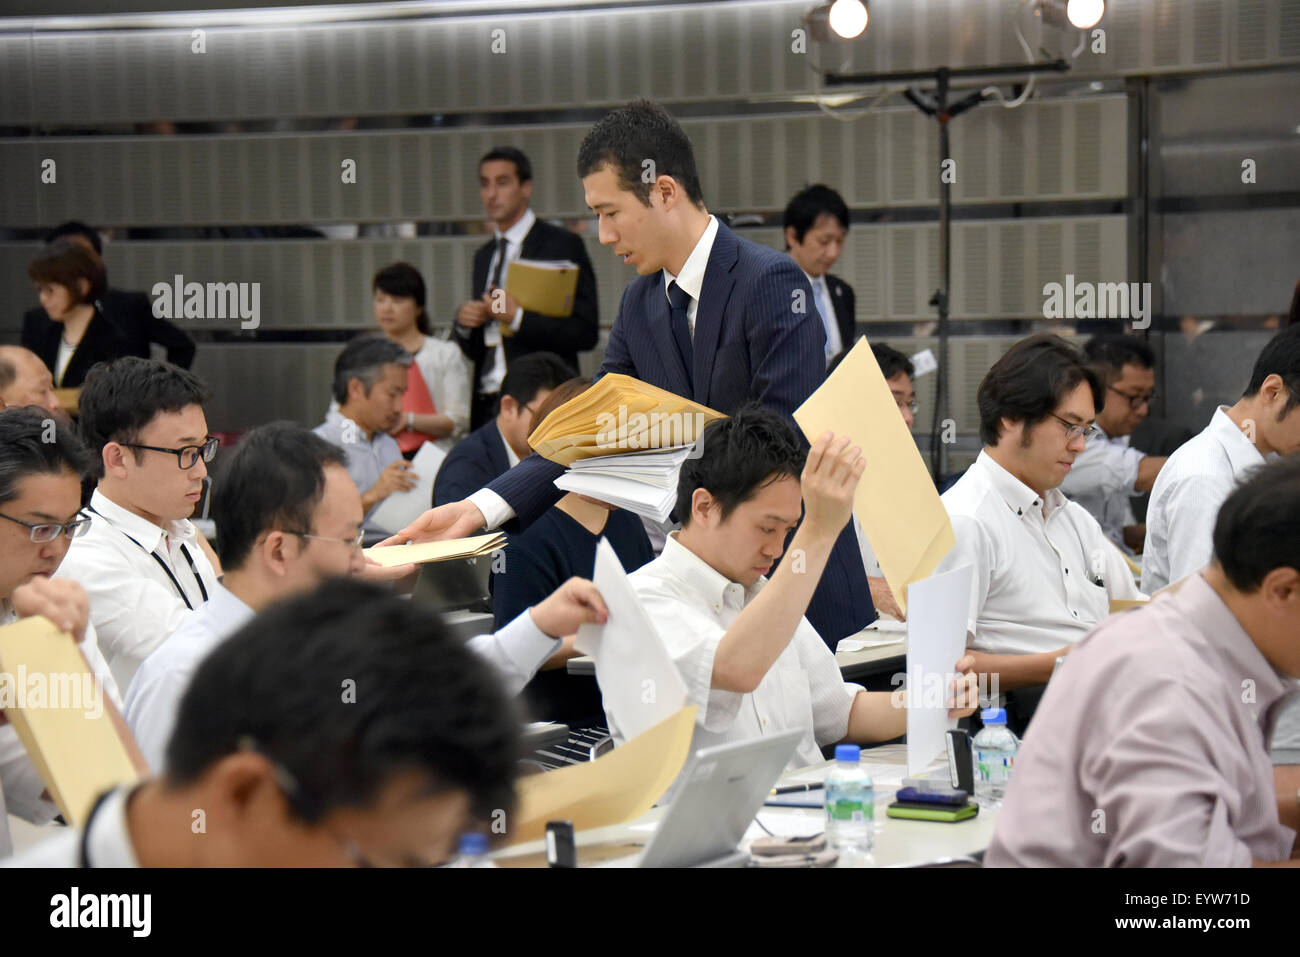 Tokyo, Japan. 4th Aug, 2015. A Toyota employee distributes printed document to members of the media prior to the automakers report of its financial results at its head office in Tokyo on Tuesday, August 4, 2015. Otake said the Japanese automakers group net profit rose 10.0 percent from a year earlier to a record 646.39 billion yen for the April to June period of 2015. The automaker's consolidated operating profit climbed 9.1 percent to a record 756.00 billion yen and sales rose 9.3 percent to 6.99 trillion yen. Credit:  Natsuki Sakai/AFLO/Alamy Live News Stock Photo